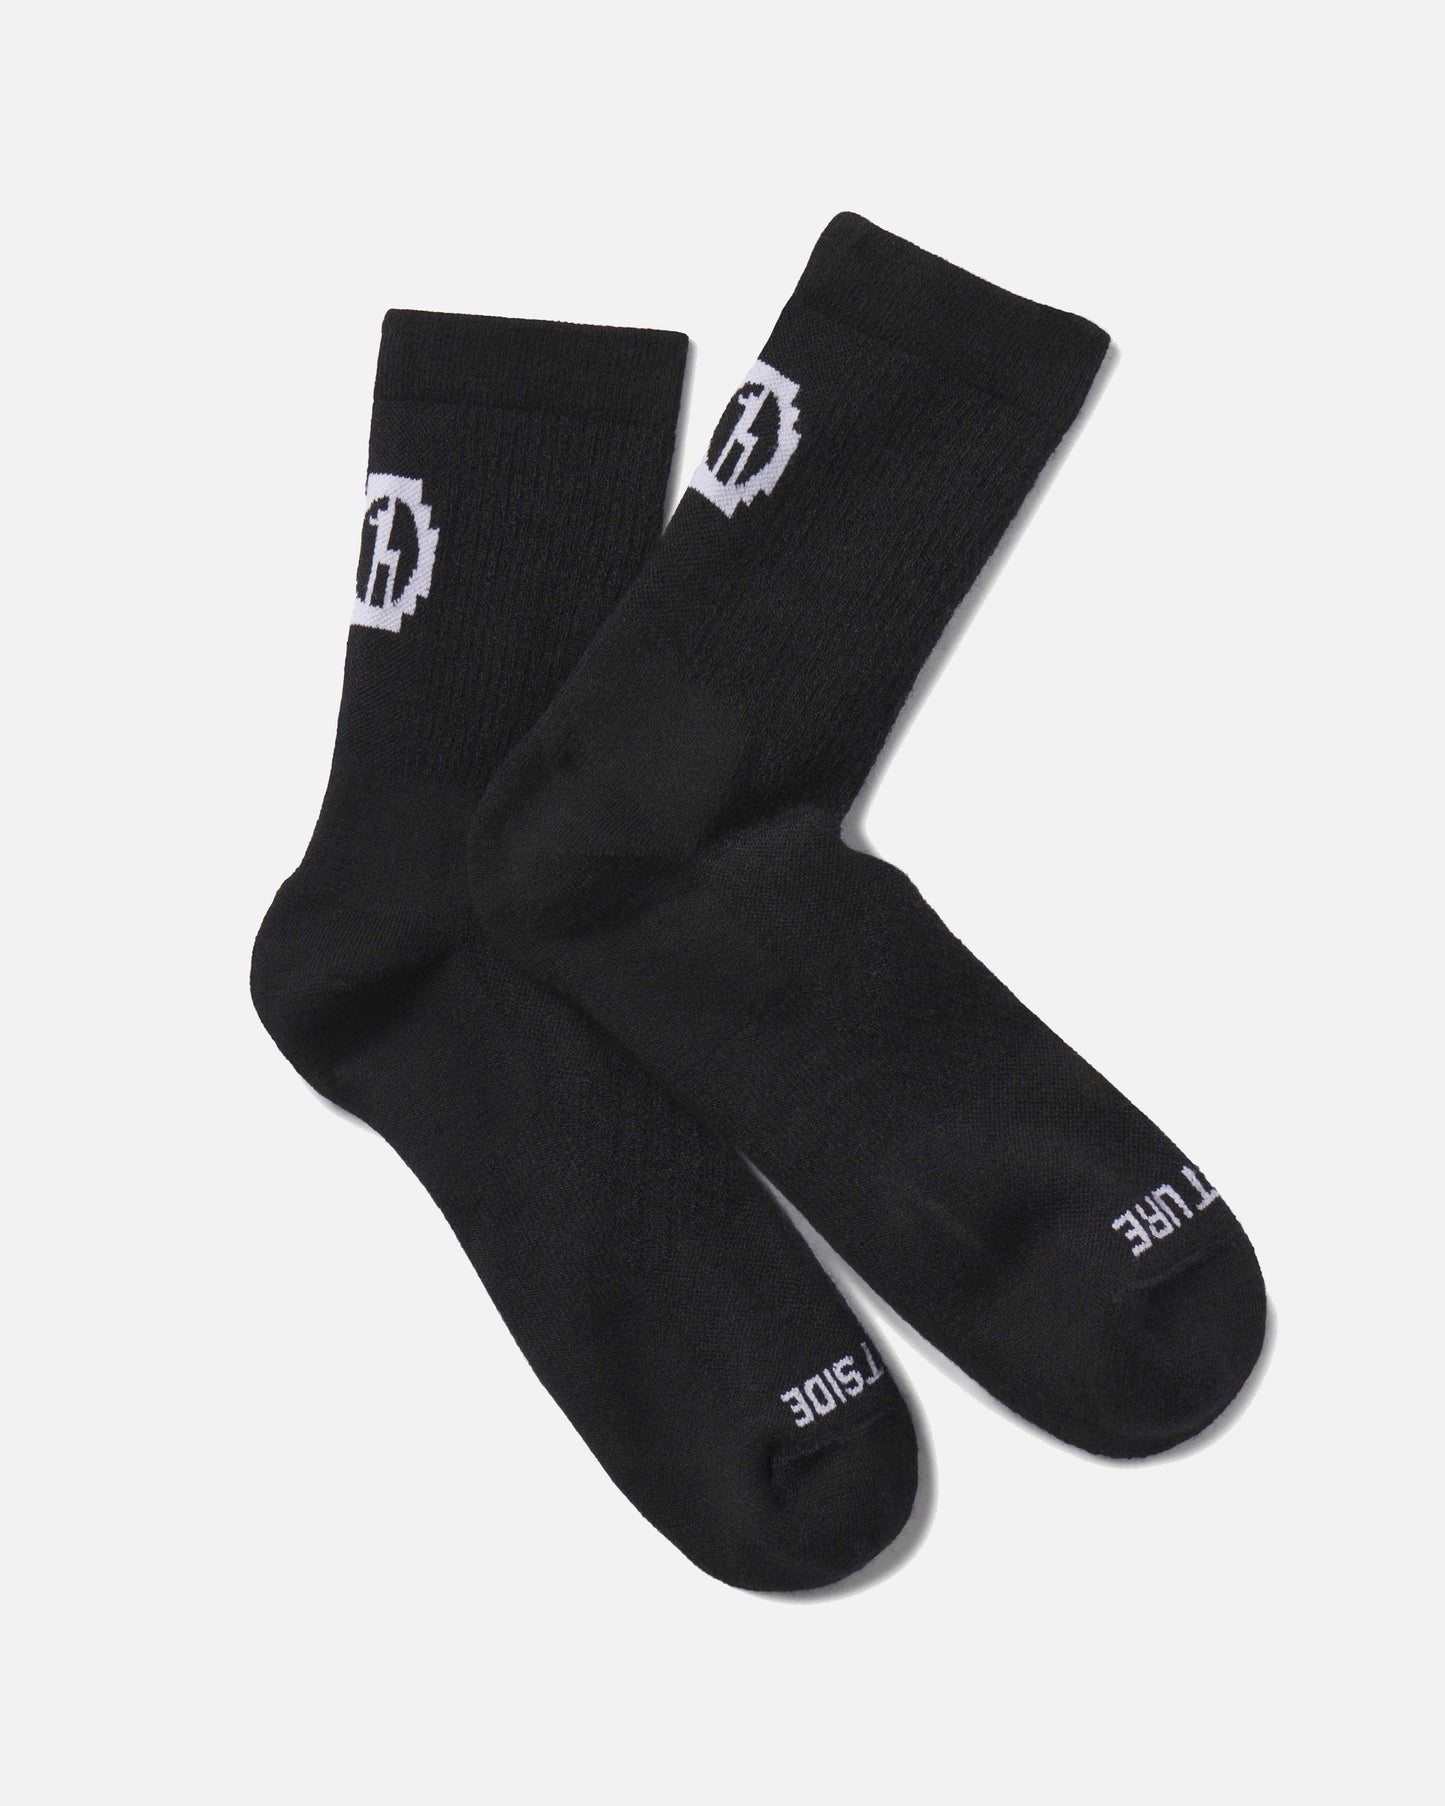 Best socks I've ever owned': These No. 1 bestsellers are on sale